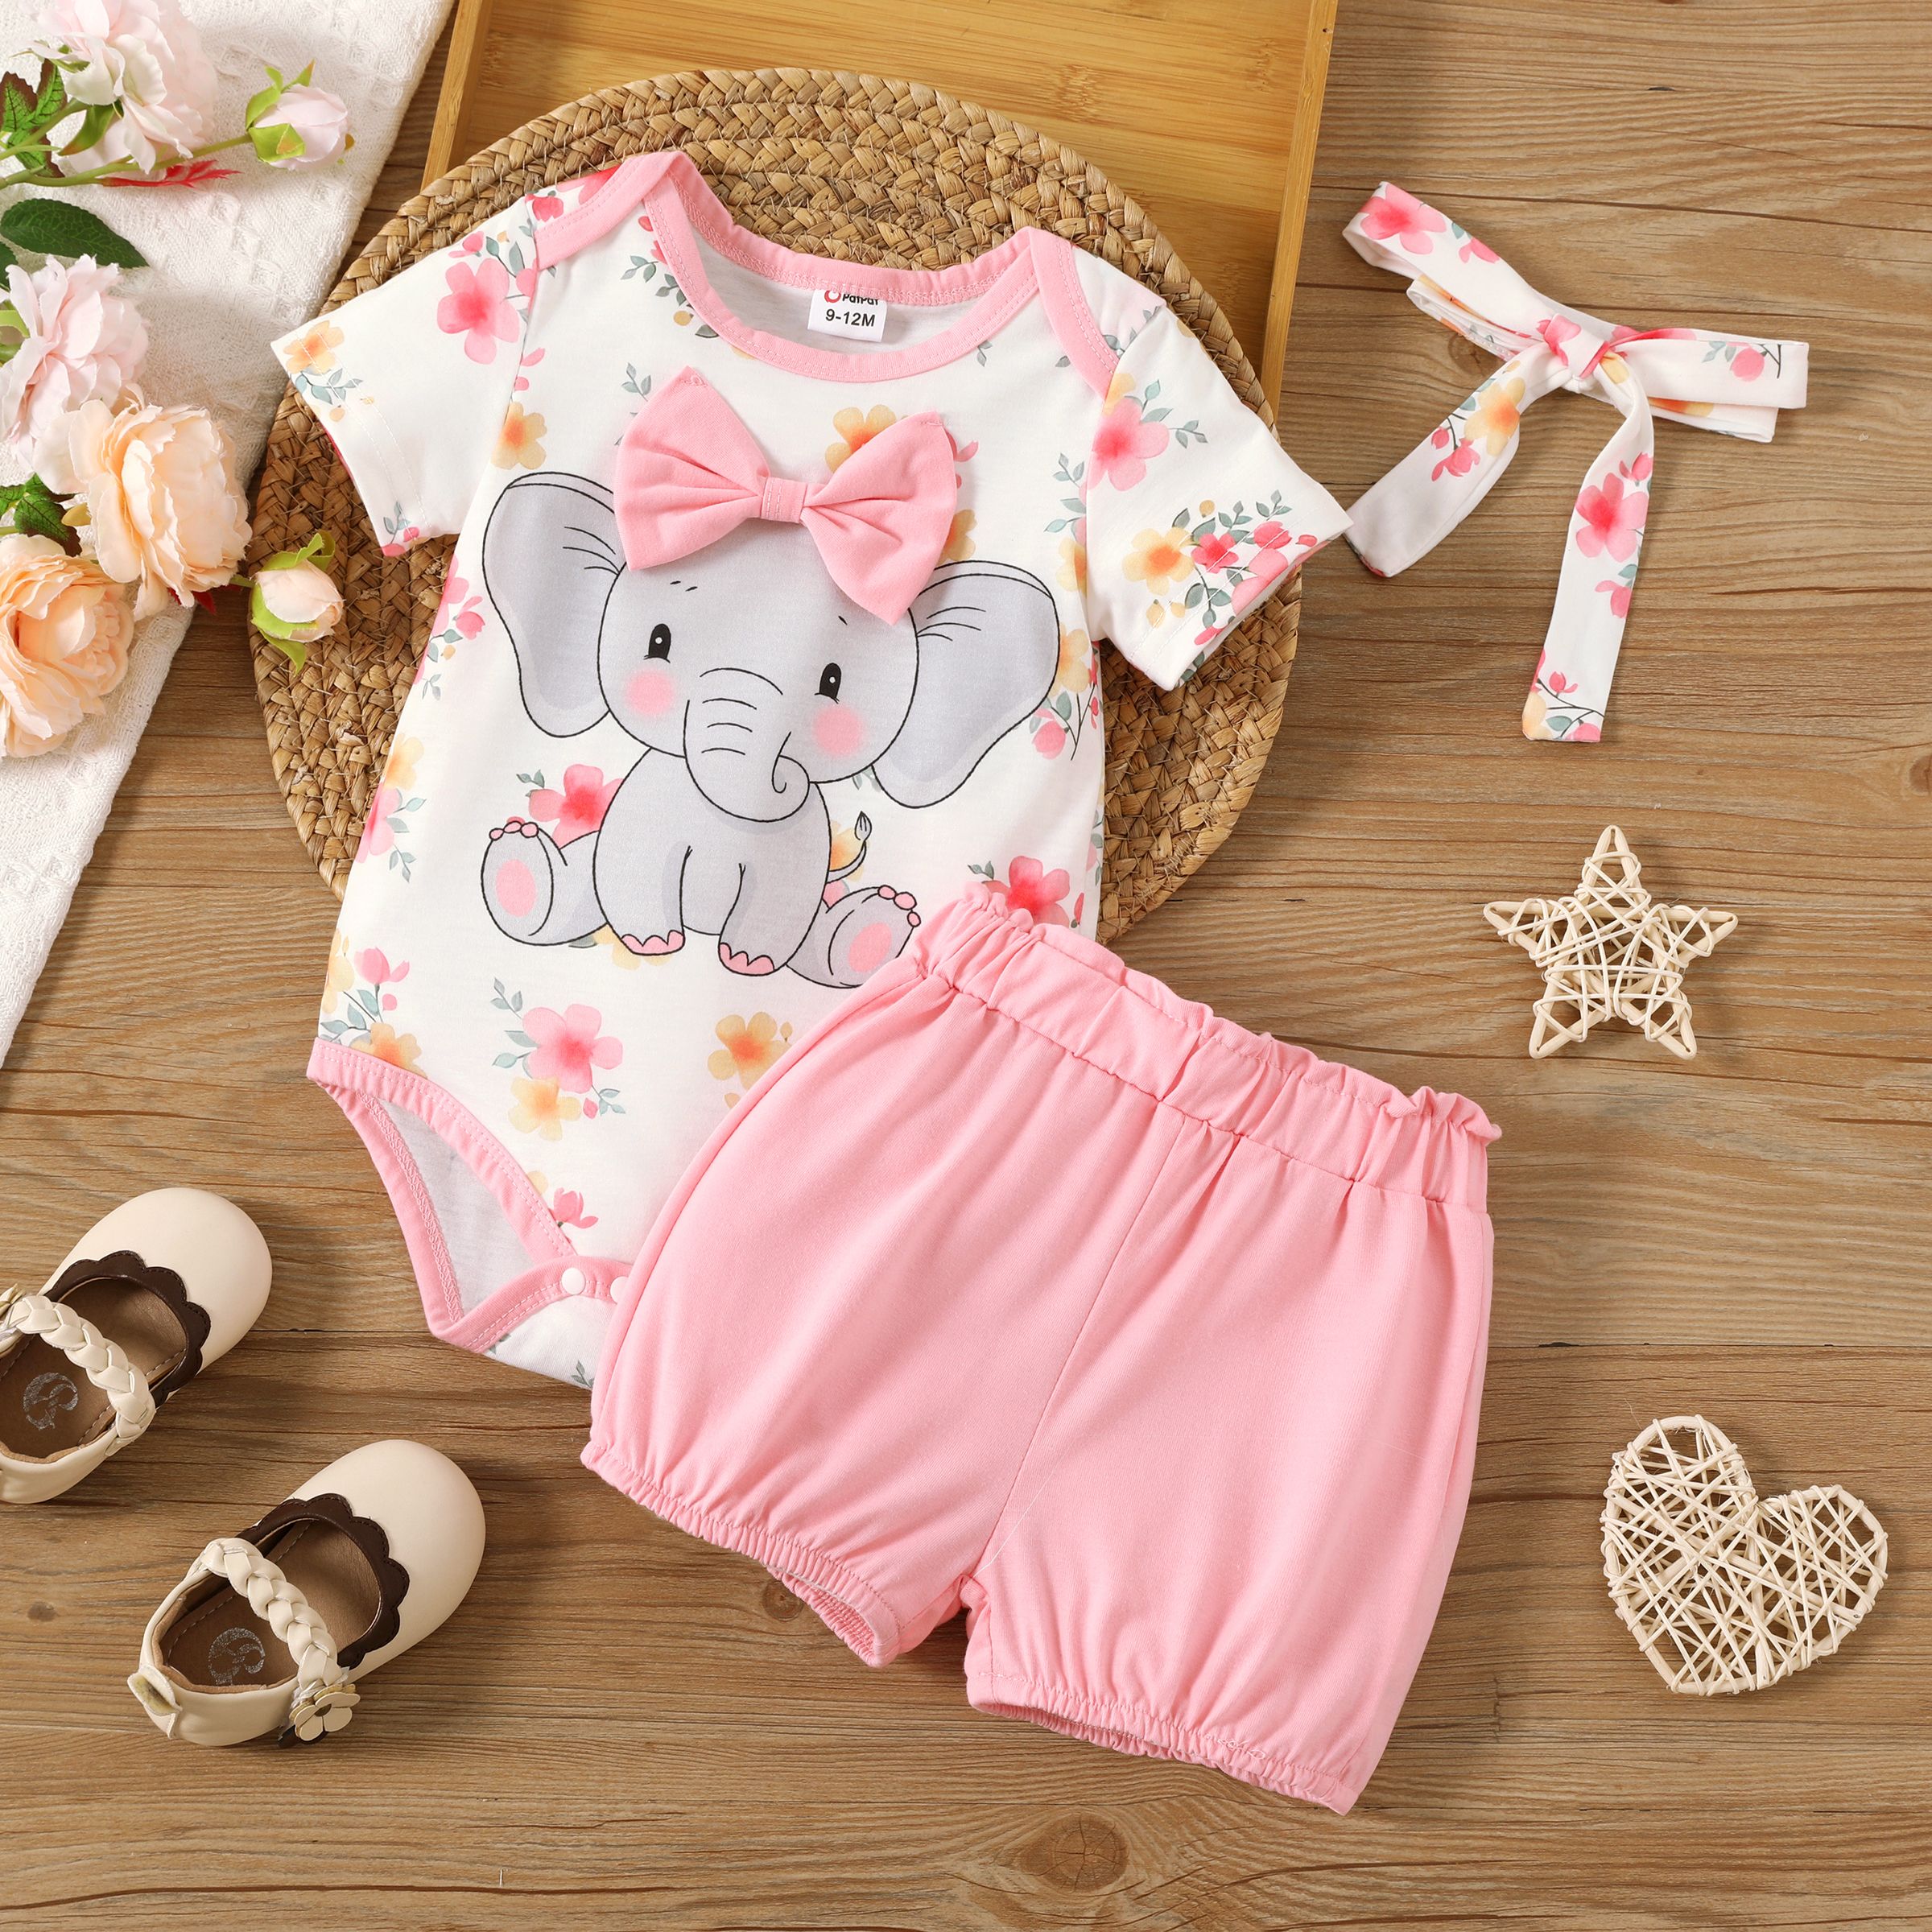 3cps Baby Girl Cute Elephant Print Romper and Shorts and Headband Set